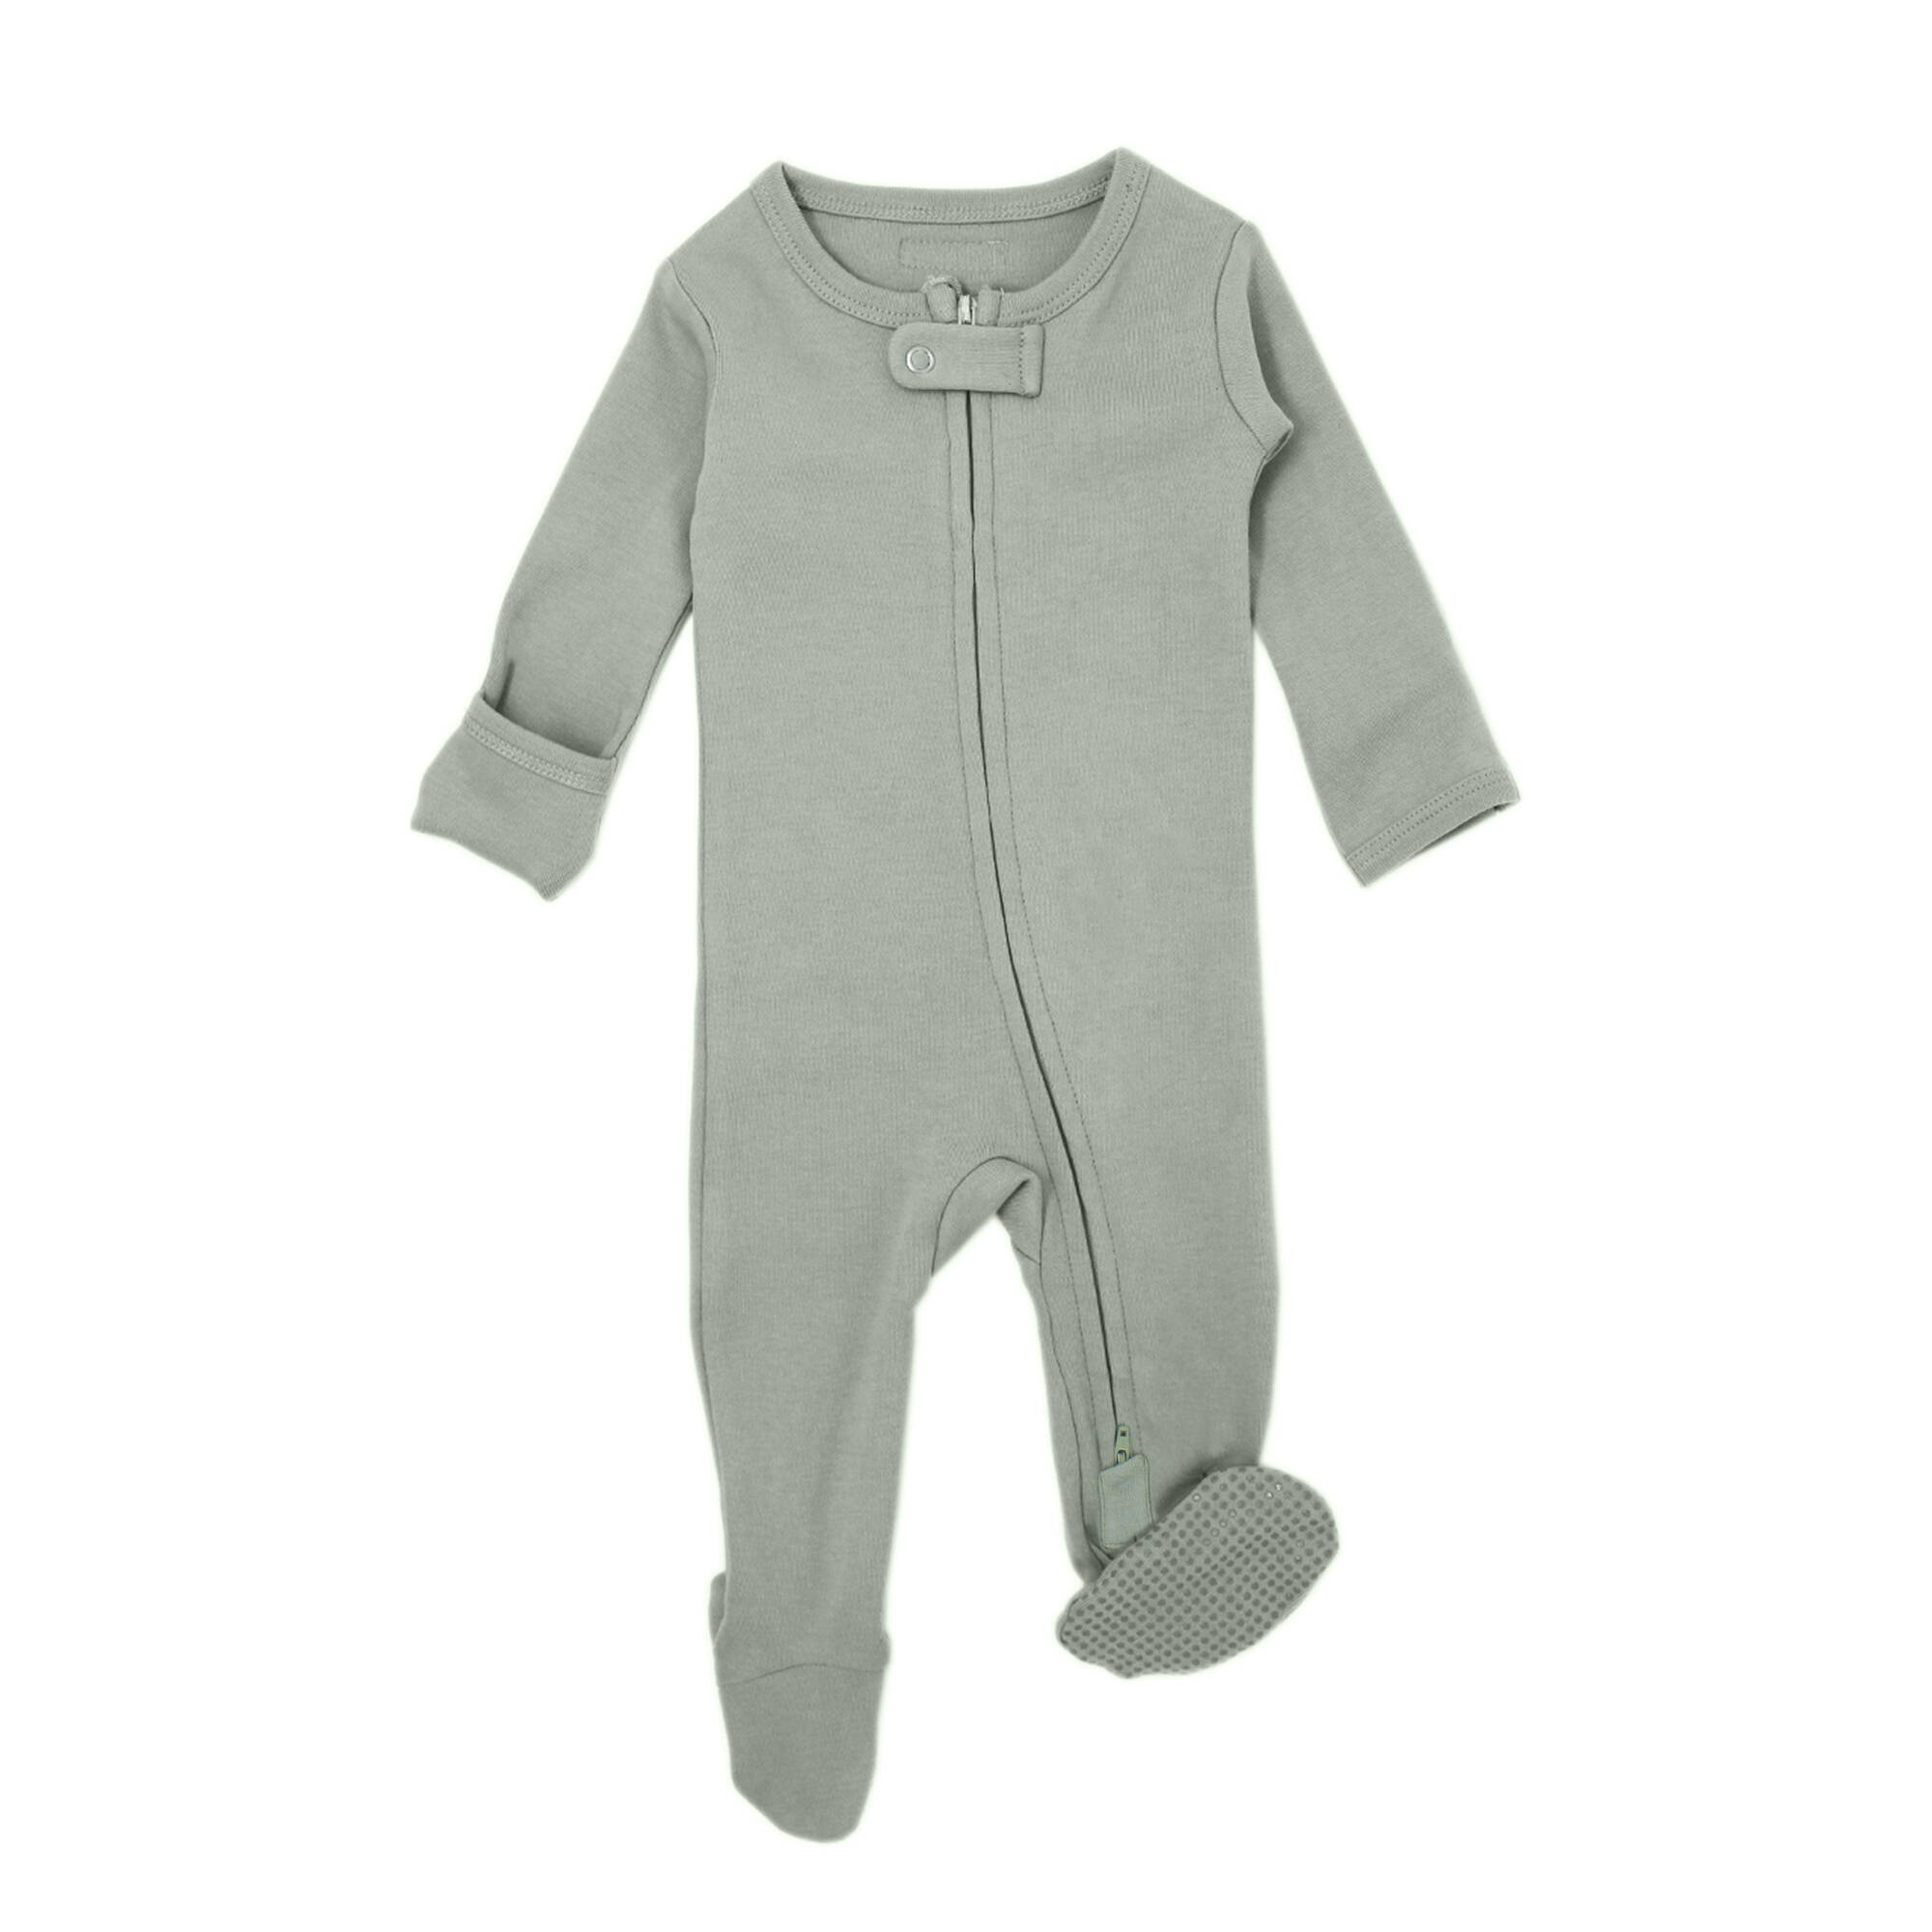 L\'ovedbaby Organic Zipper Overall & Hazel Kids Baby - Footed